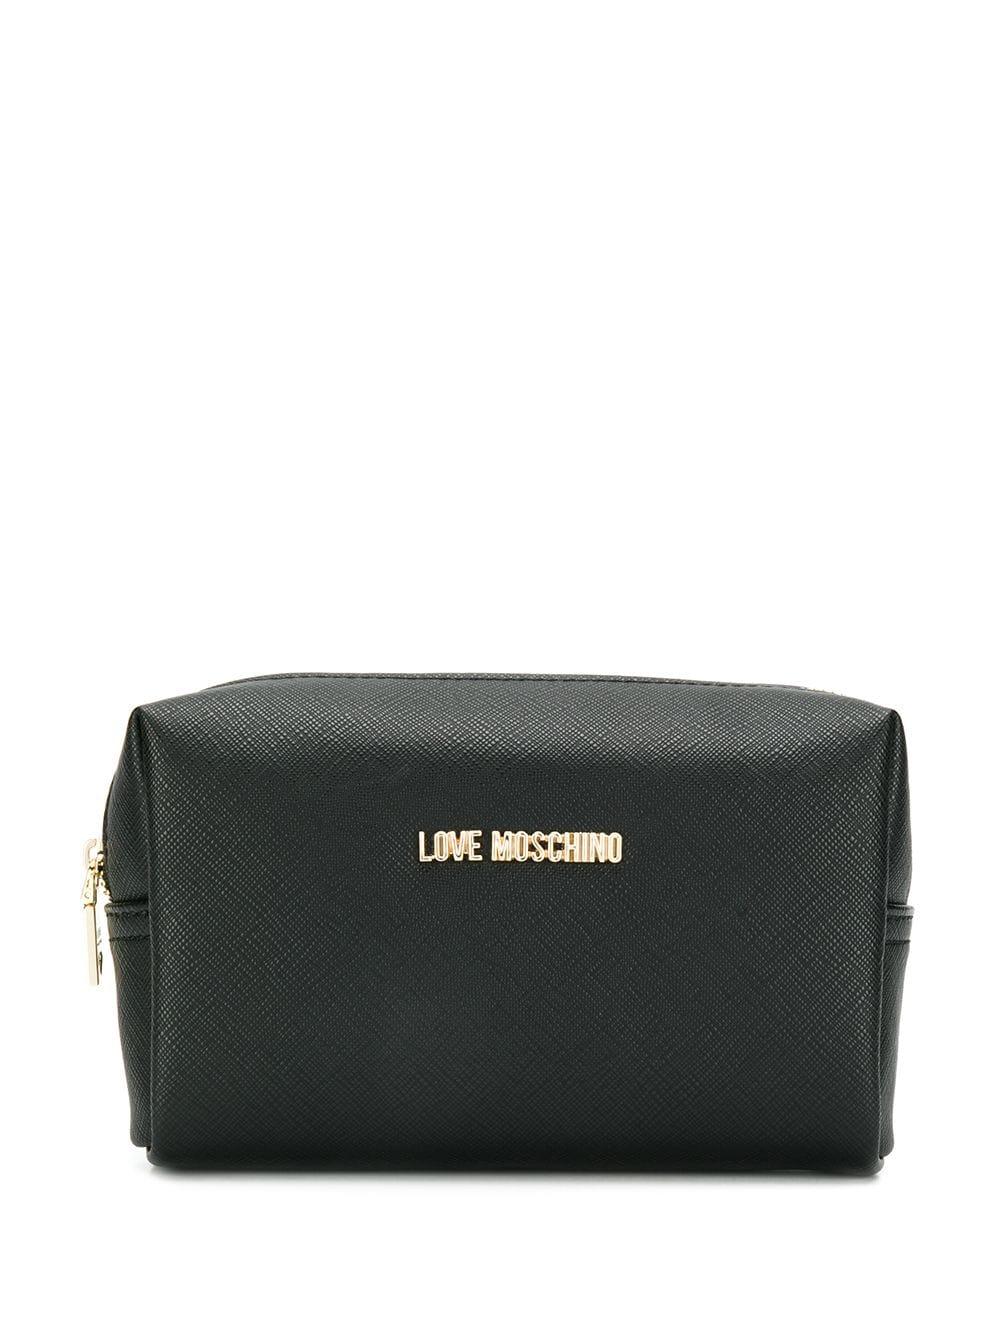 Love Moschino Leather Logo Zipped Cosmetic Bag in Black | Lyst